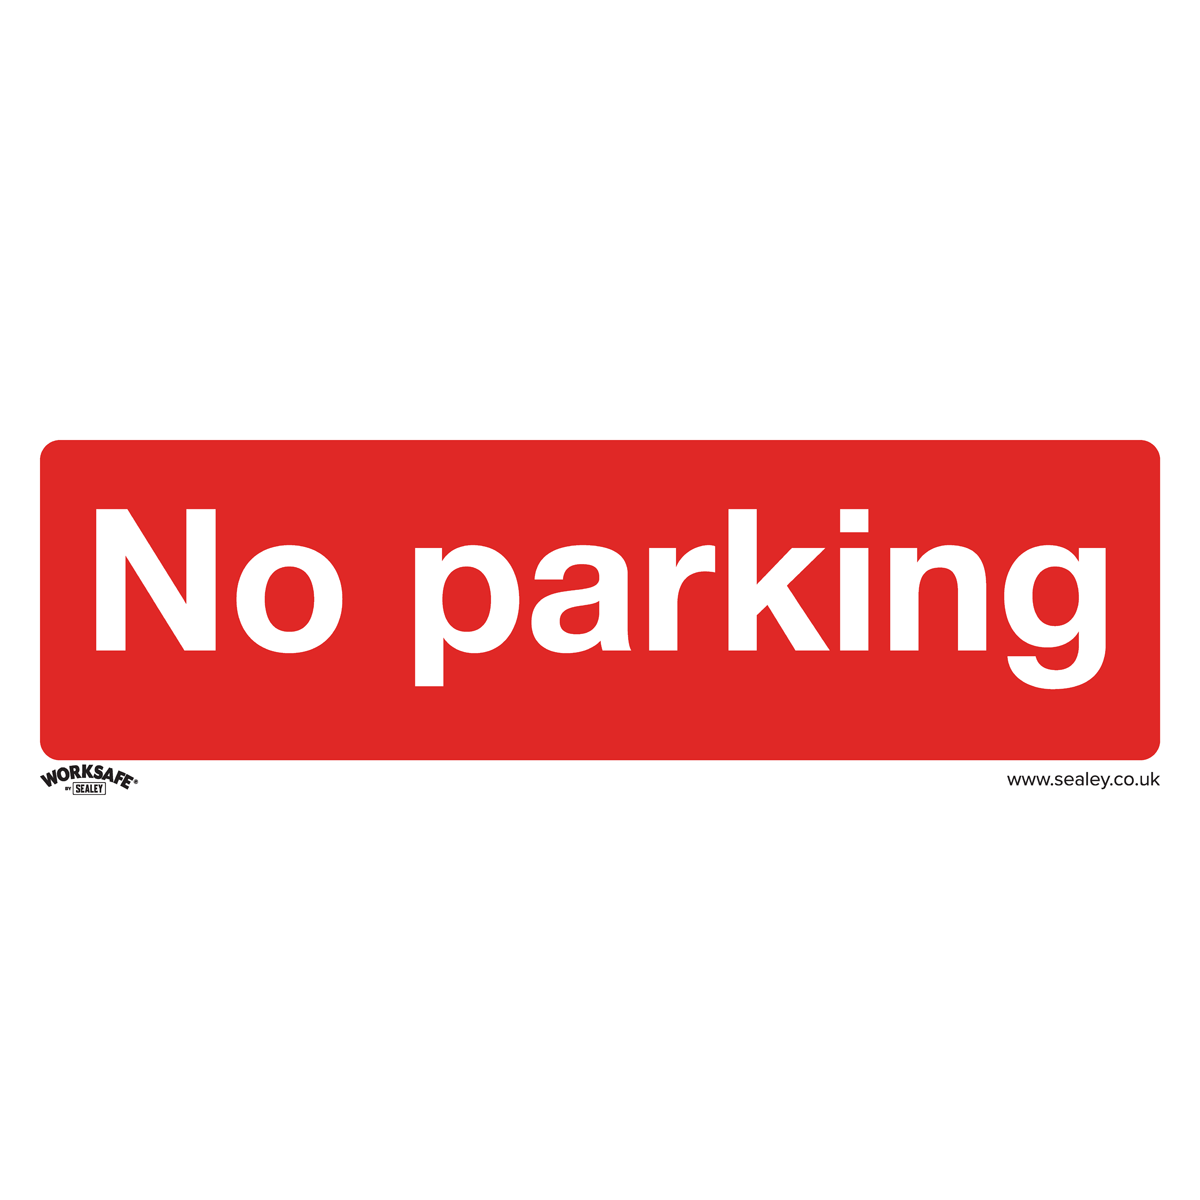 Sealey Prohibition Safety Sign - No Parking - Rigid Plastic